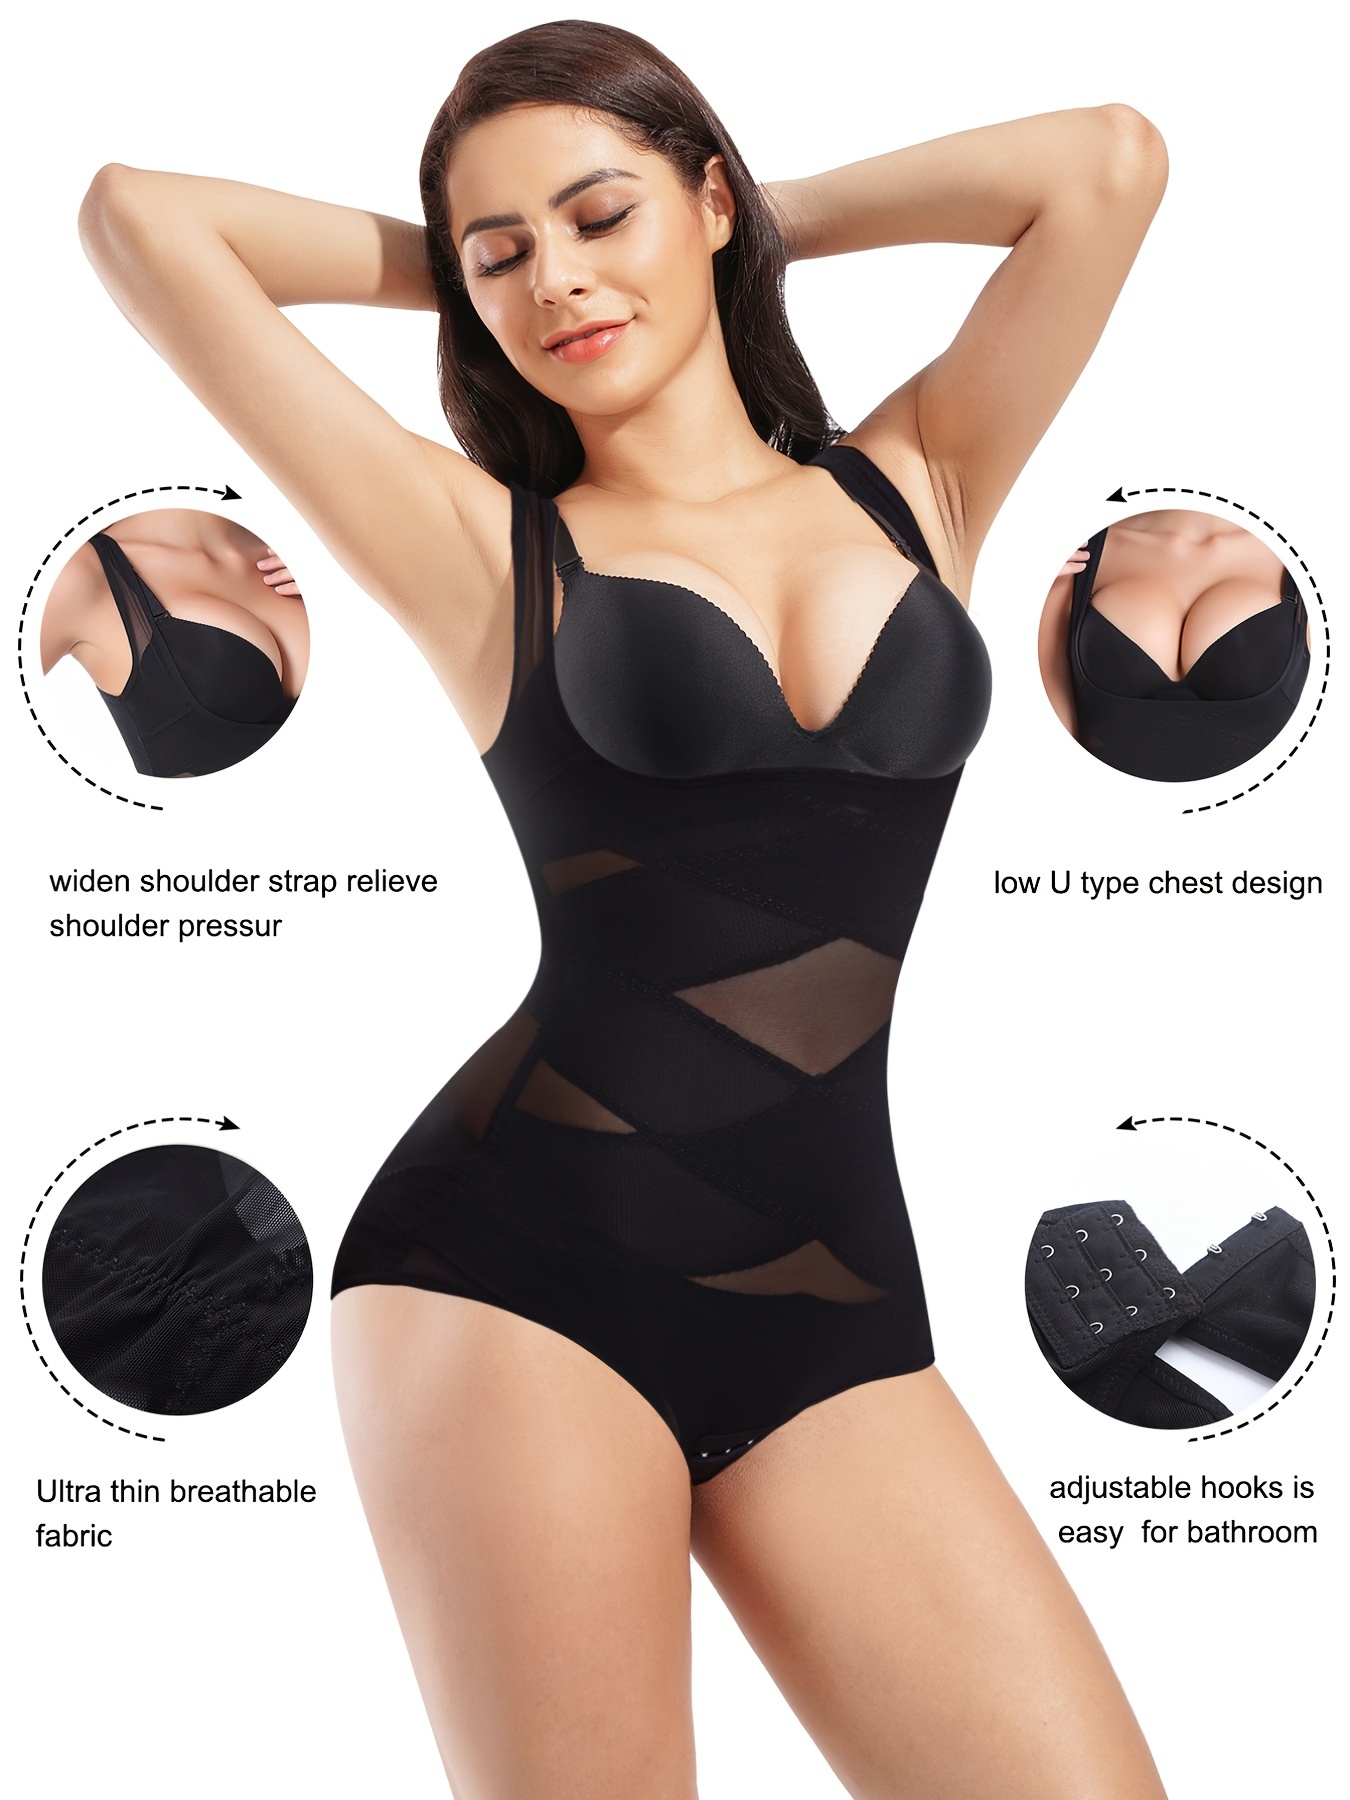 Dermawear Slimmer 2.0 Full Body Shaper Shines Bright! 🗣️ Dive into the  reasons behind our customers' glowing reviews and remarkable…